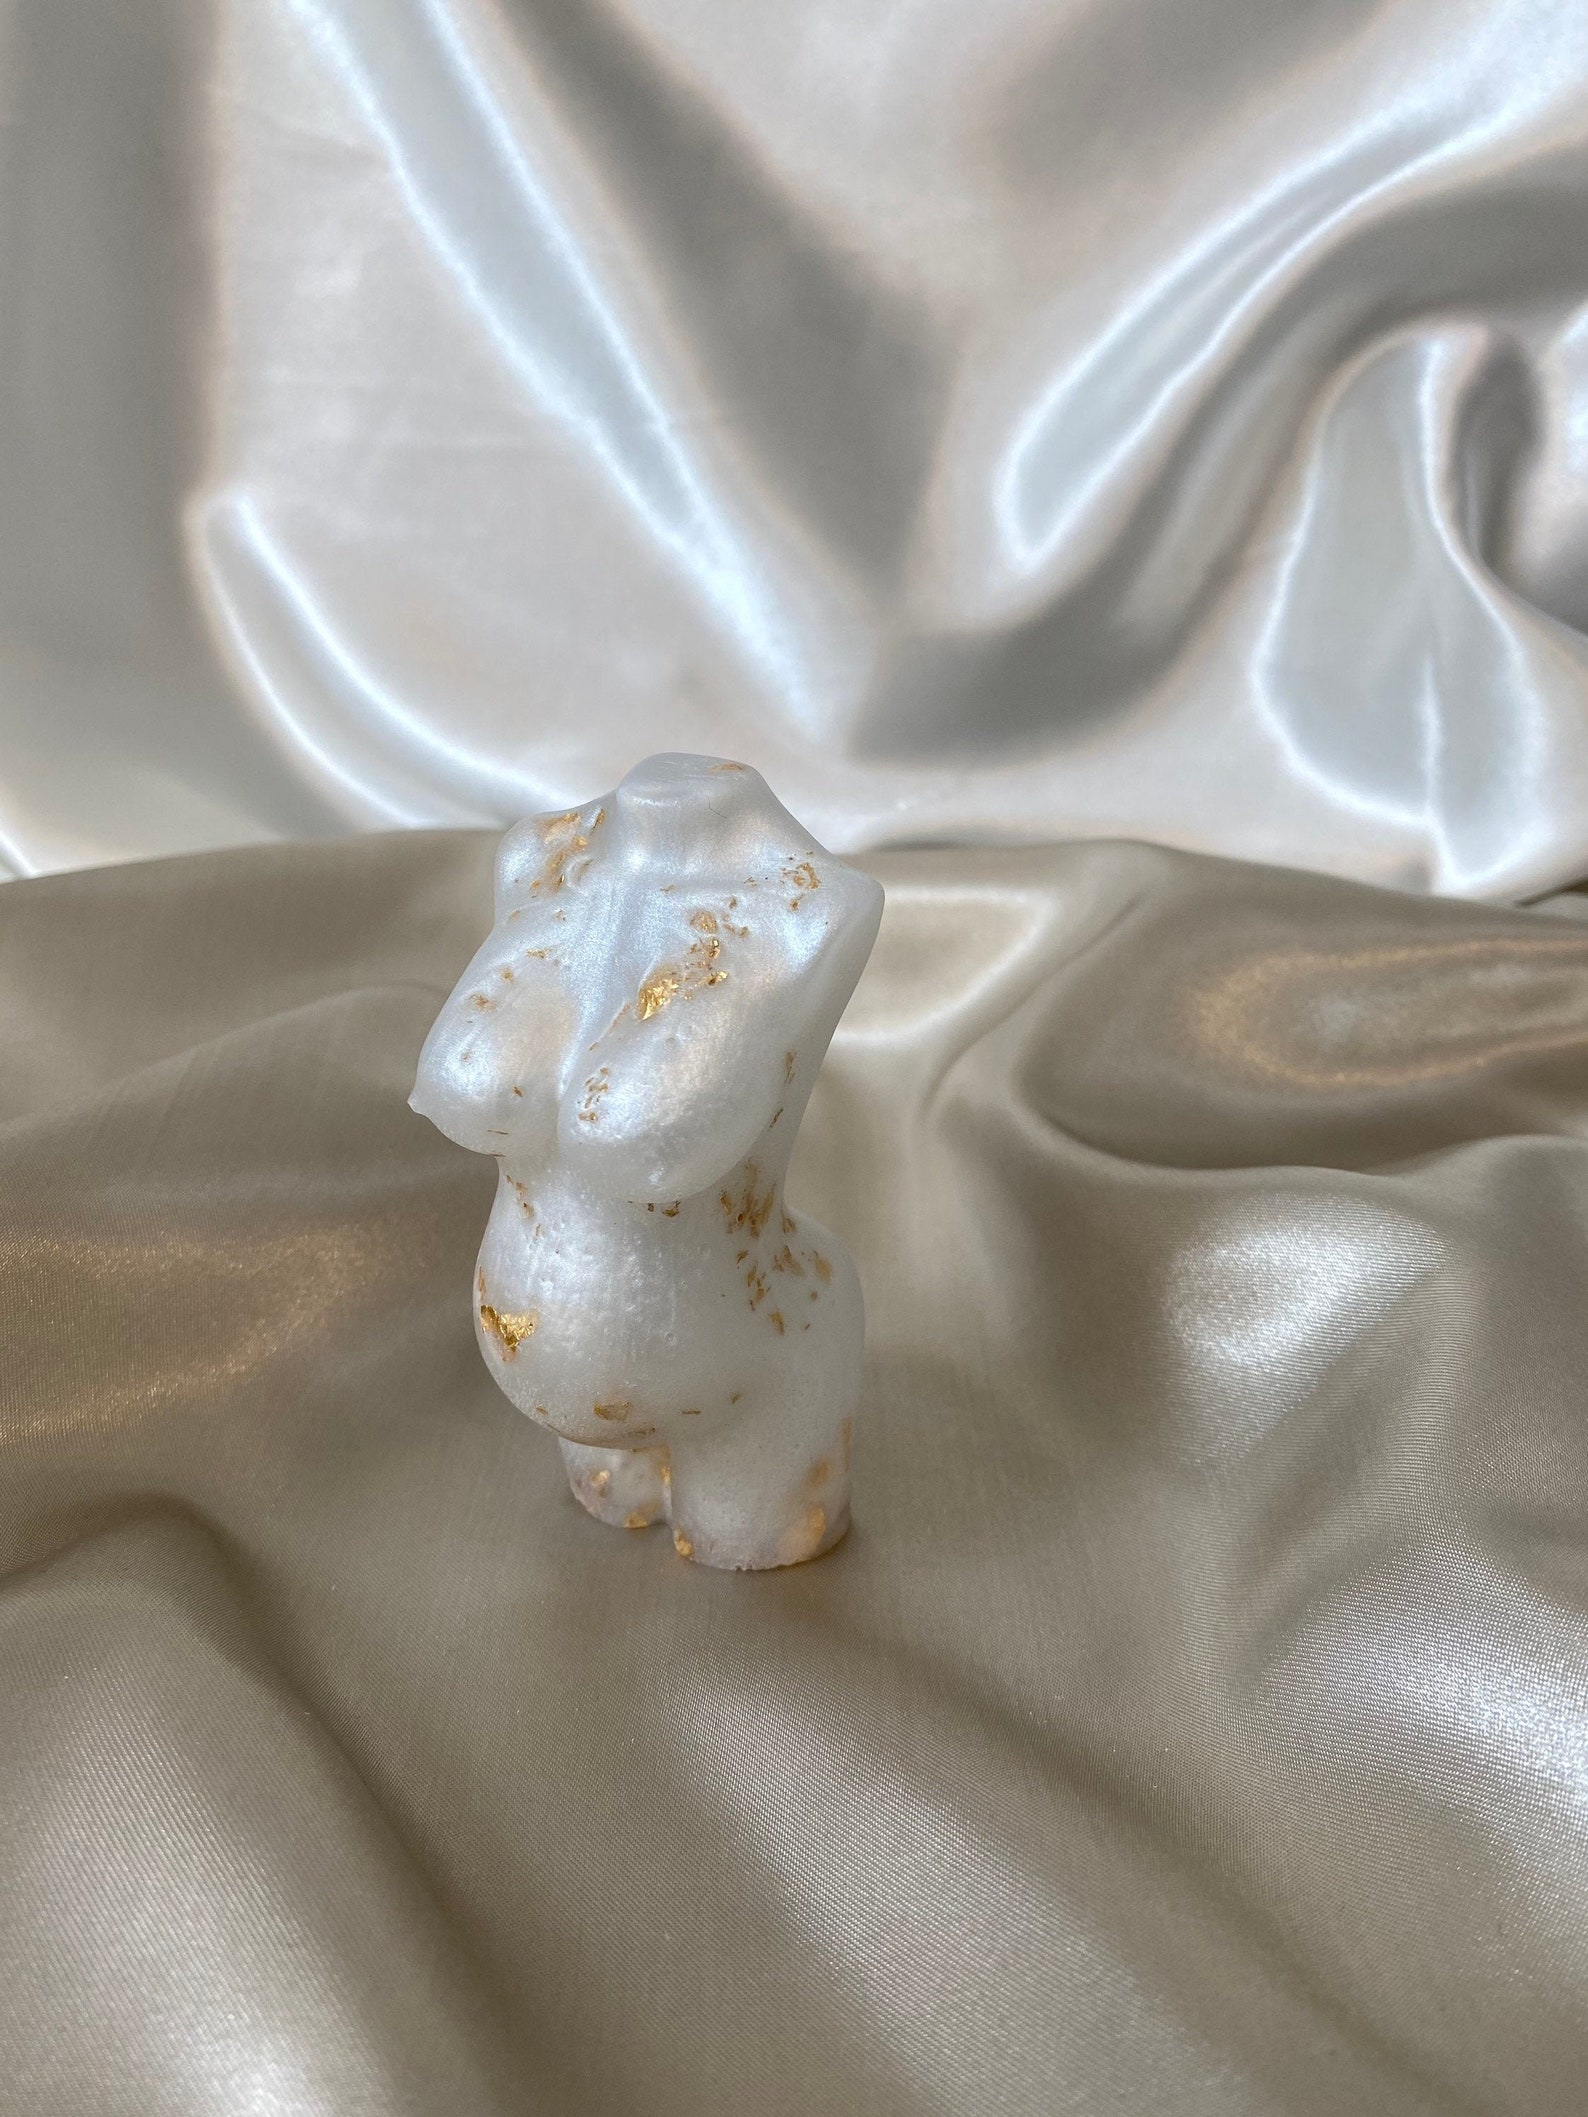 White and Gold Resin Pregnant Woman Ornament Art Sculpture - Etsy